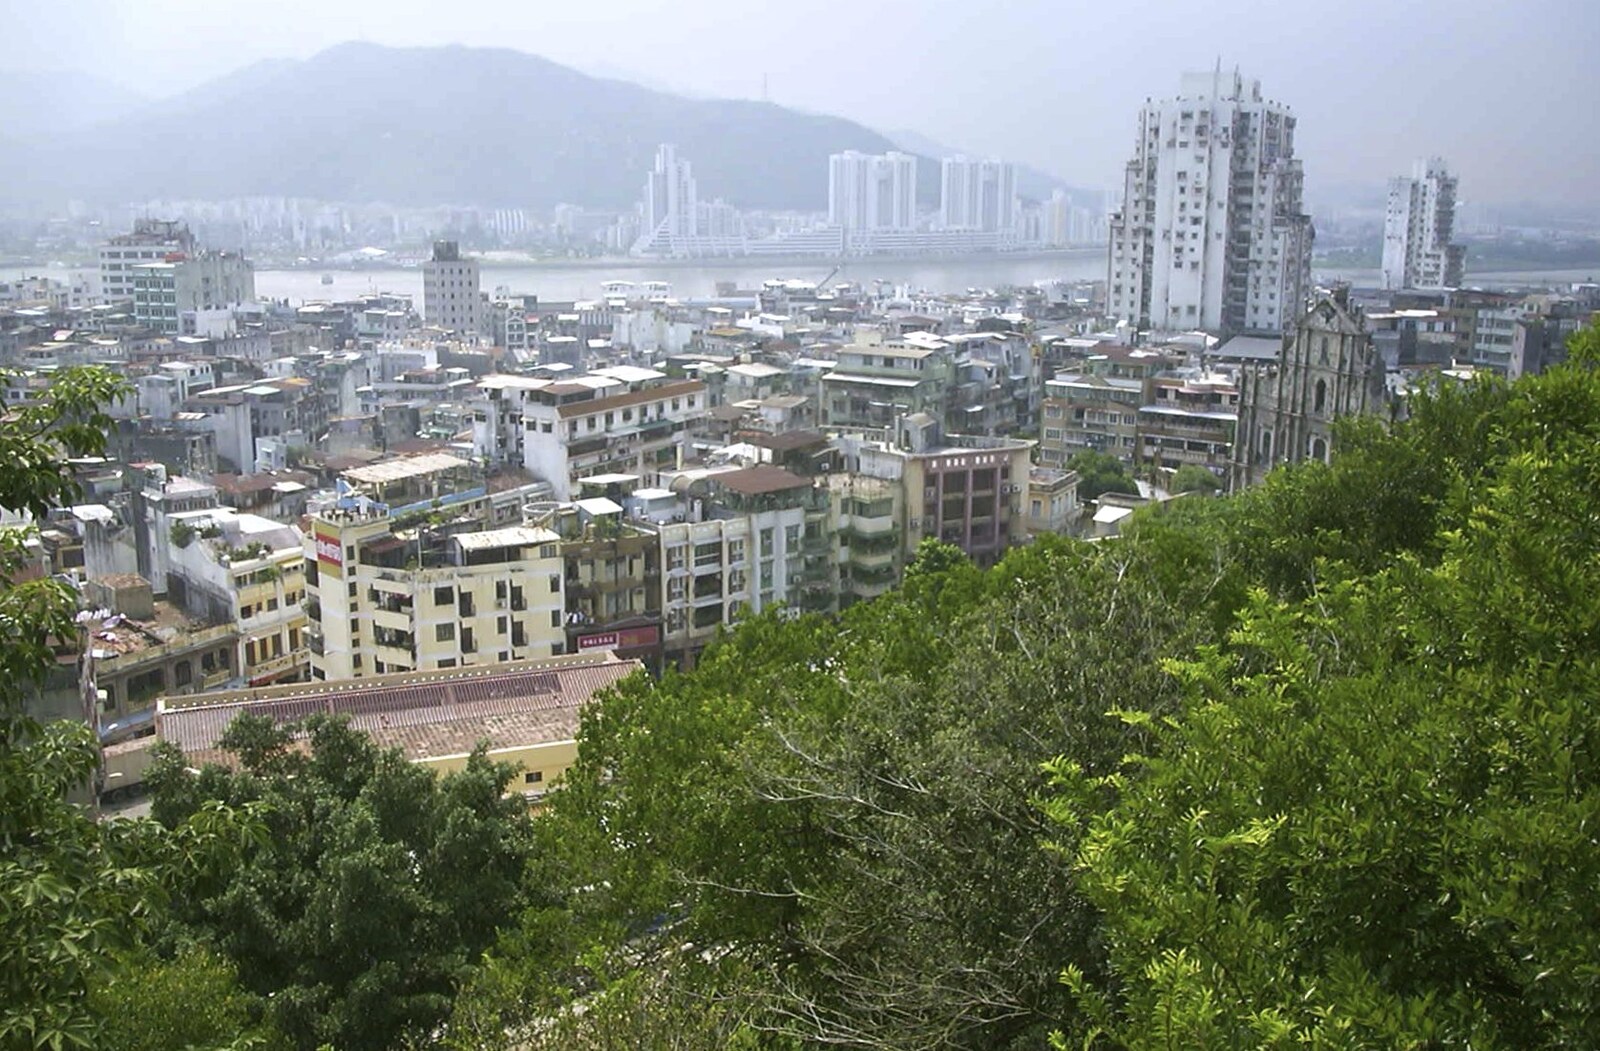 A Day Trip to Macau, China - 16th August 2001: A view from the top of Monte Hill